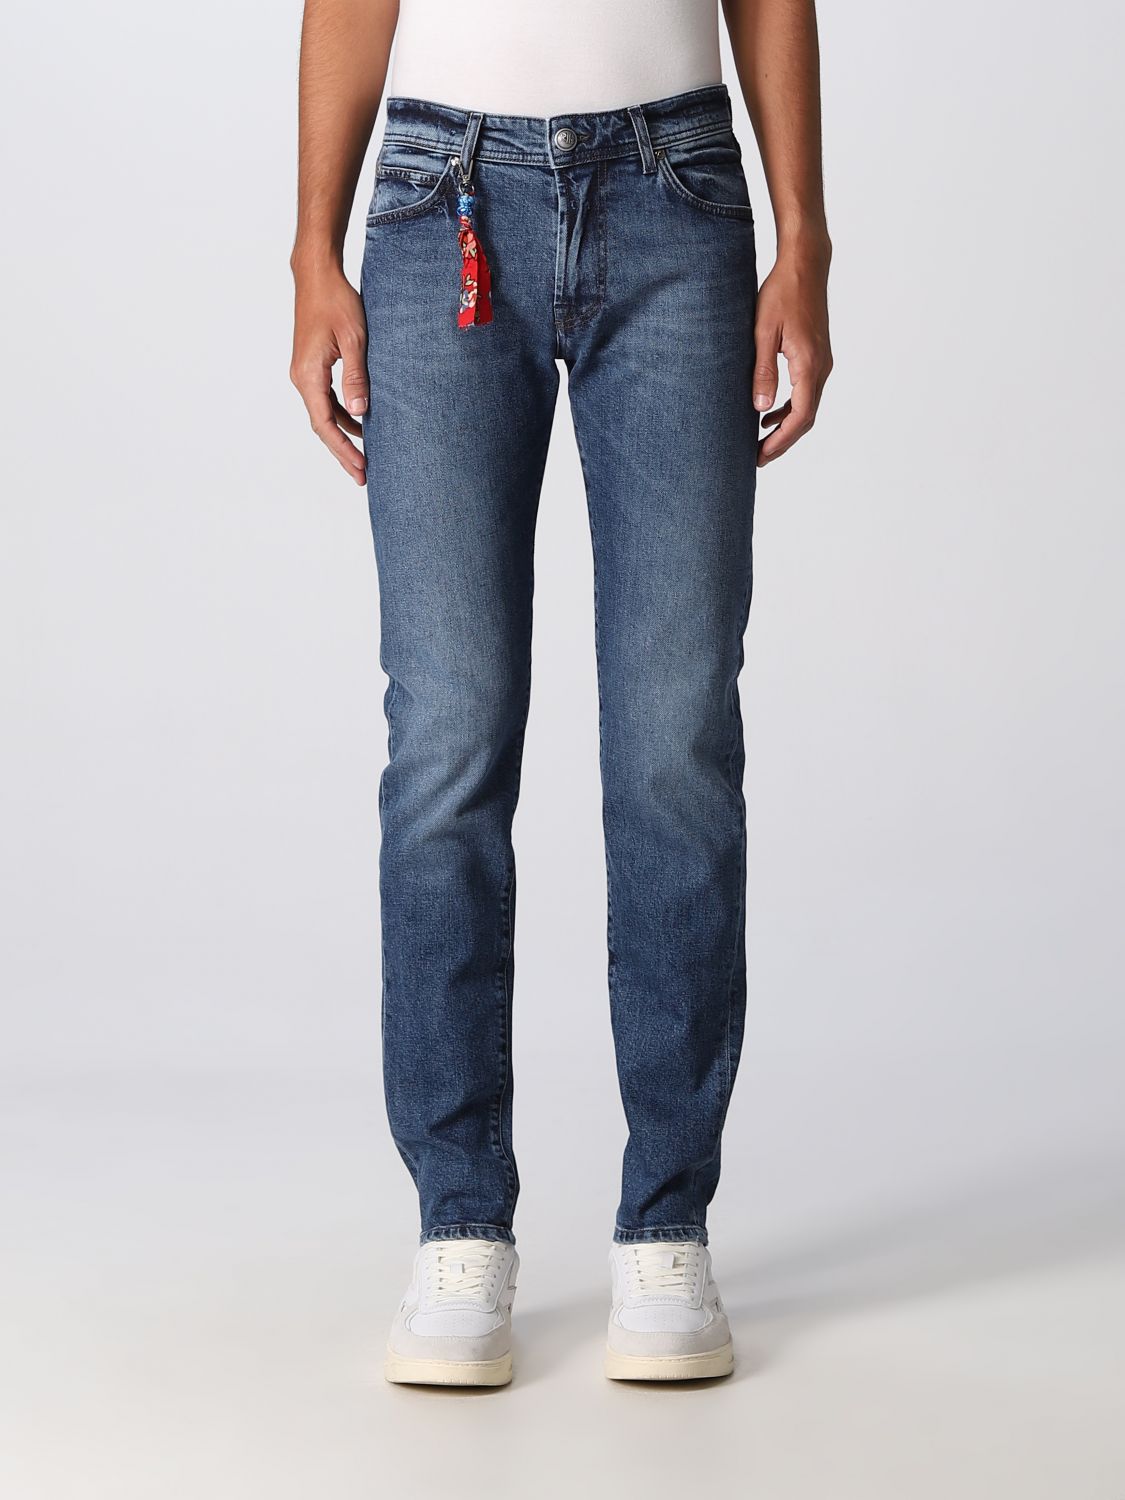 Jeans Roy Rogers: Jeans Roy Rogers para hombre azul oscuro 1